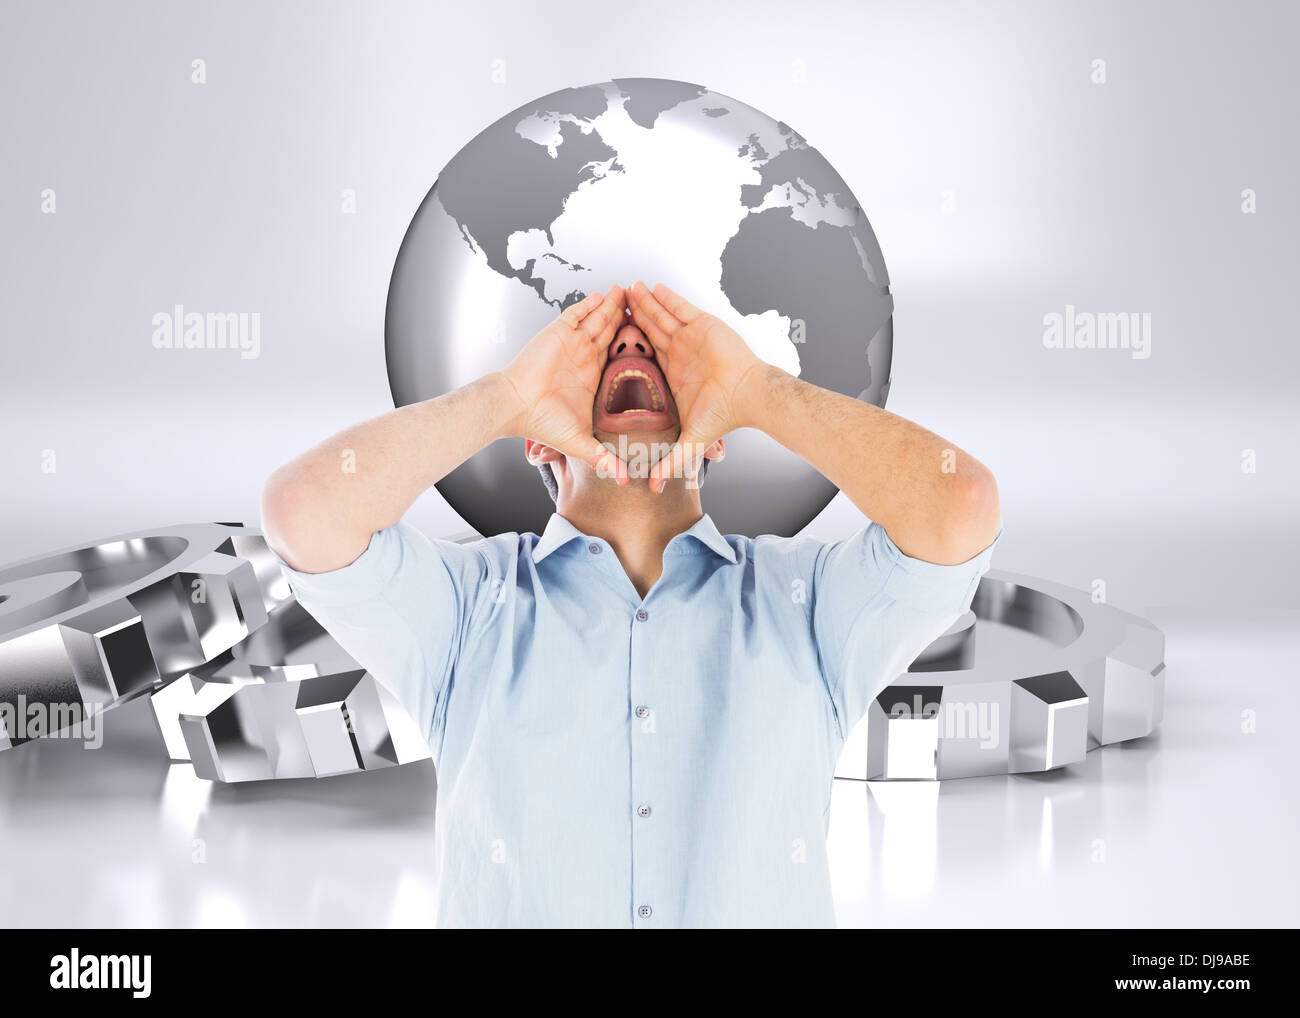 Composite image of shouting casual man standing Stock Photo